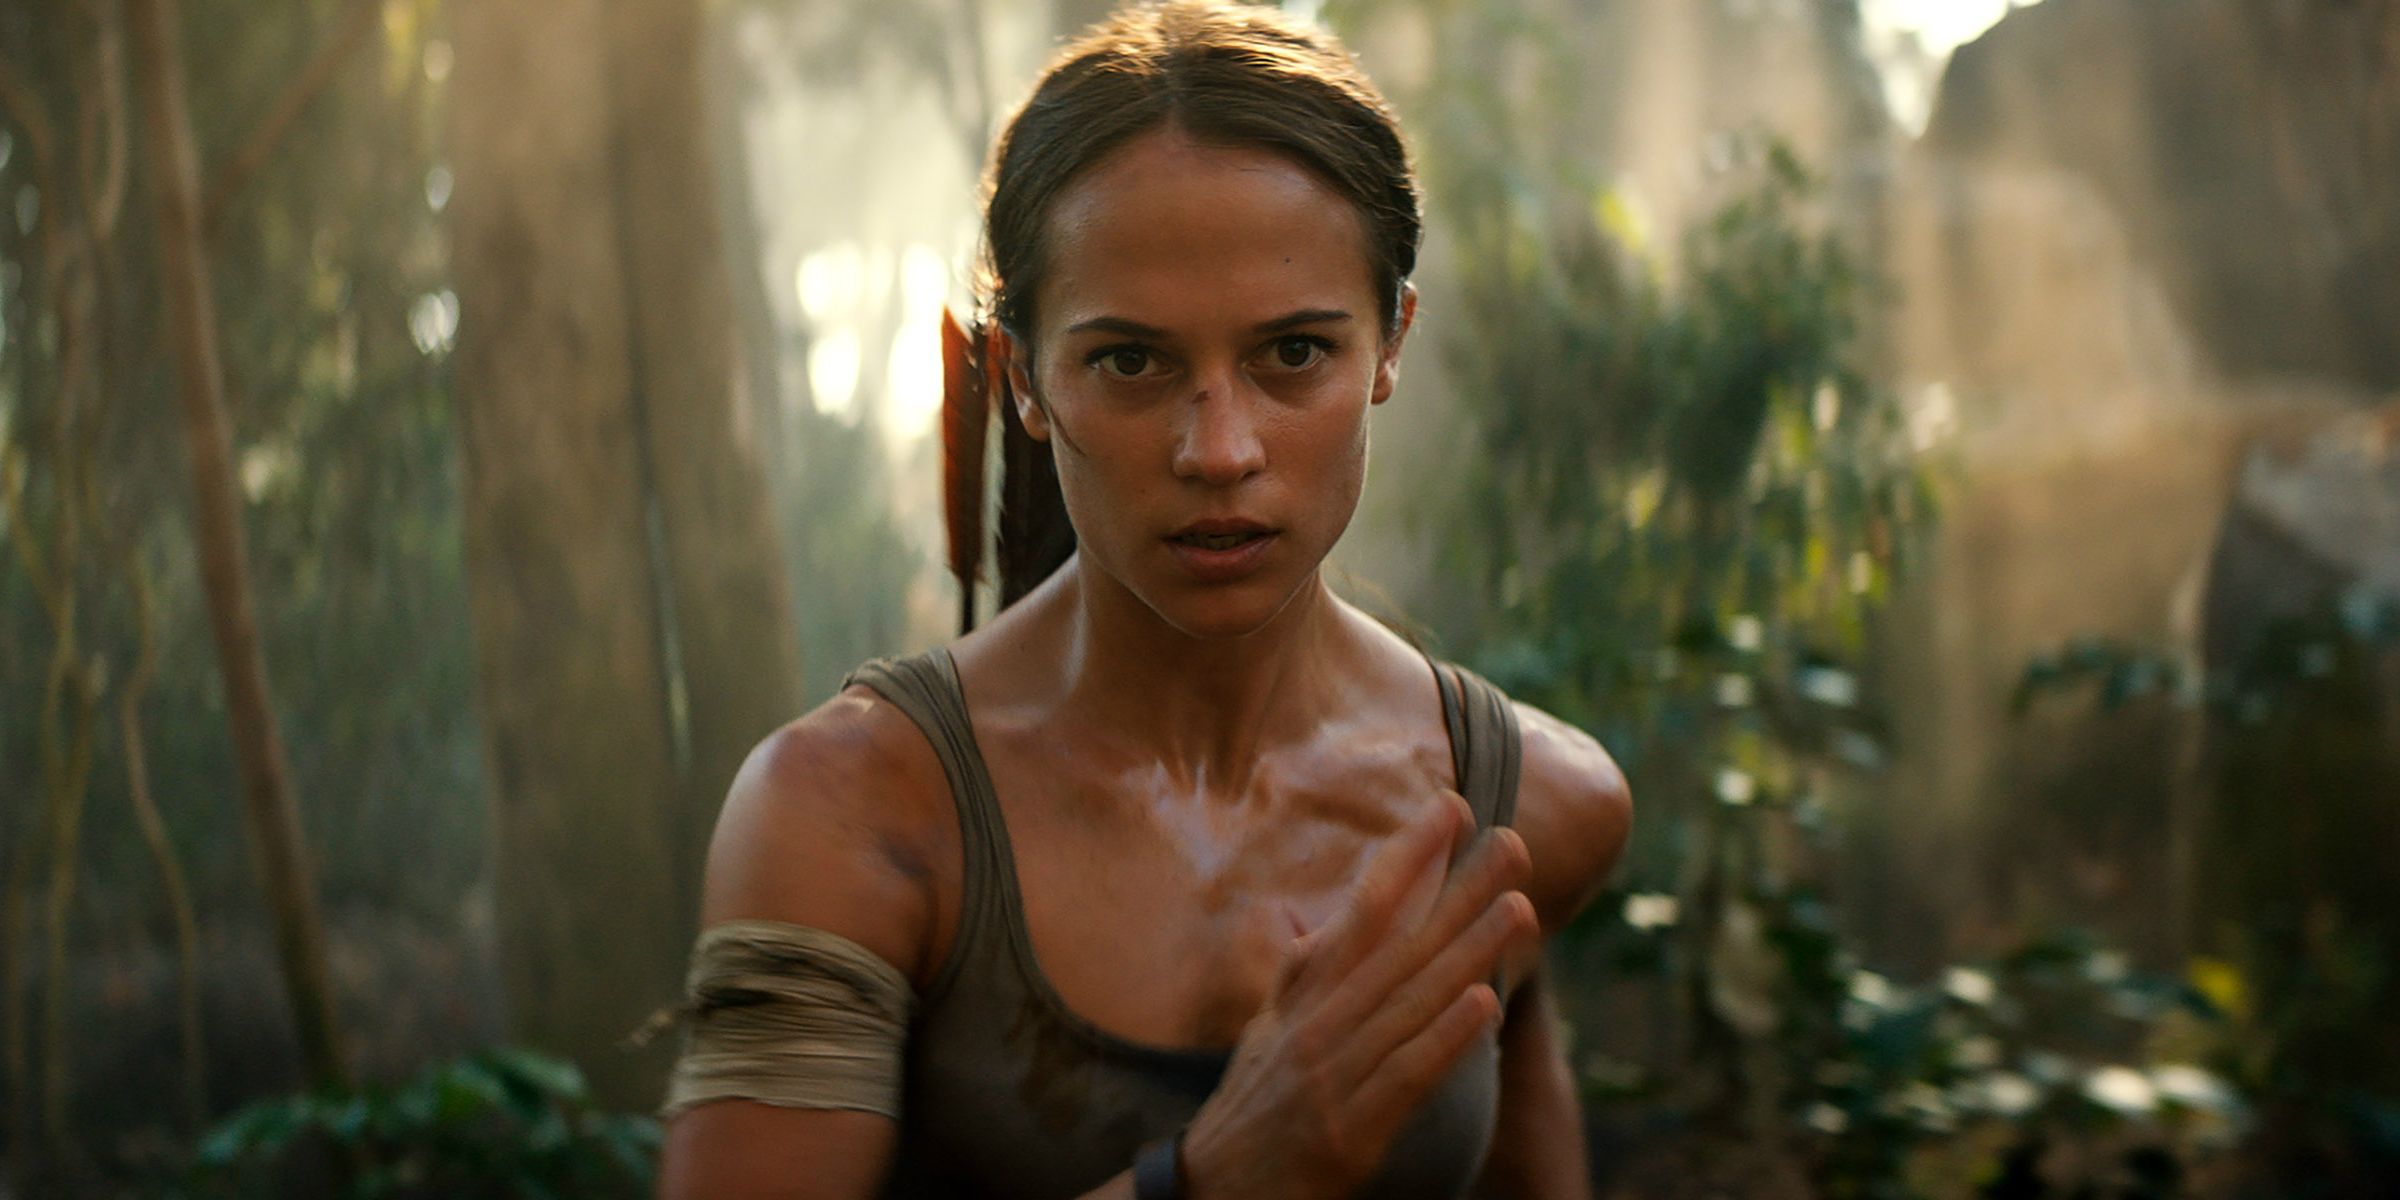 Does Tomb Raider Have An End-Credits Scene?